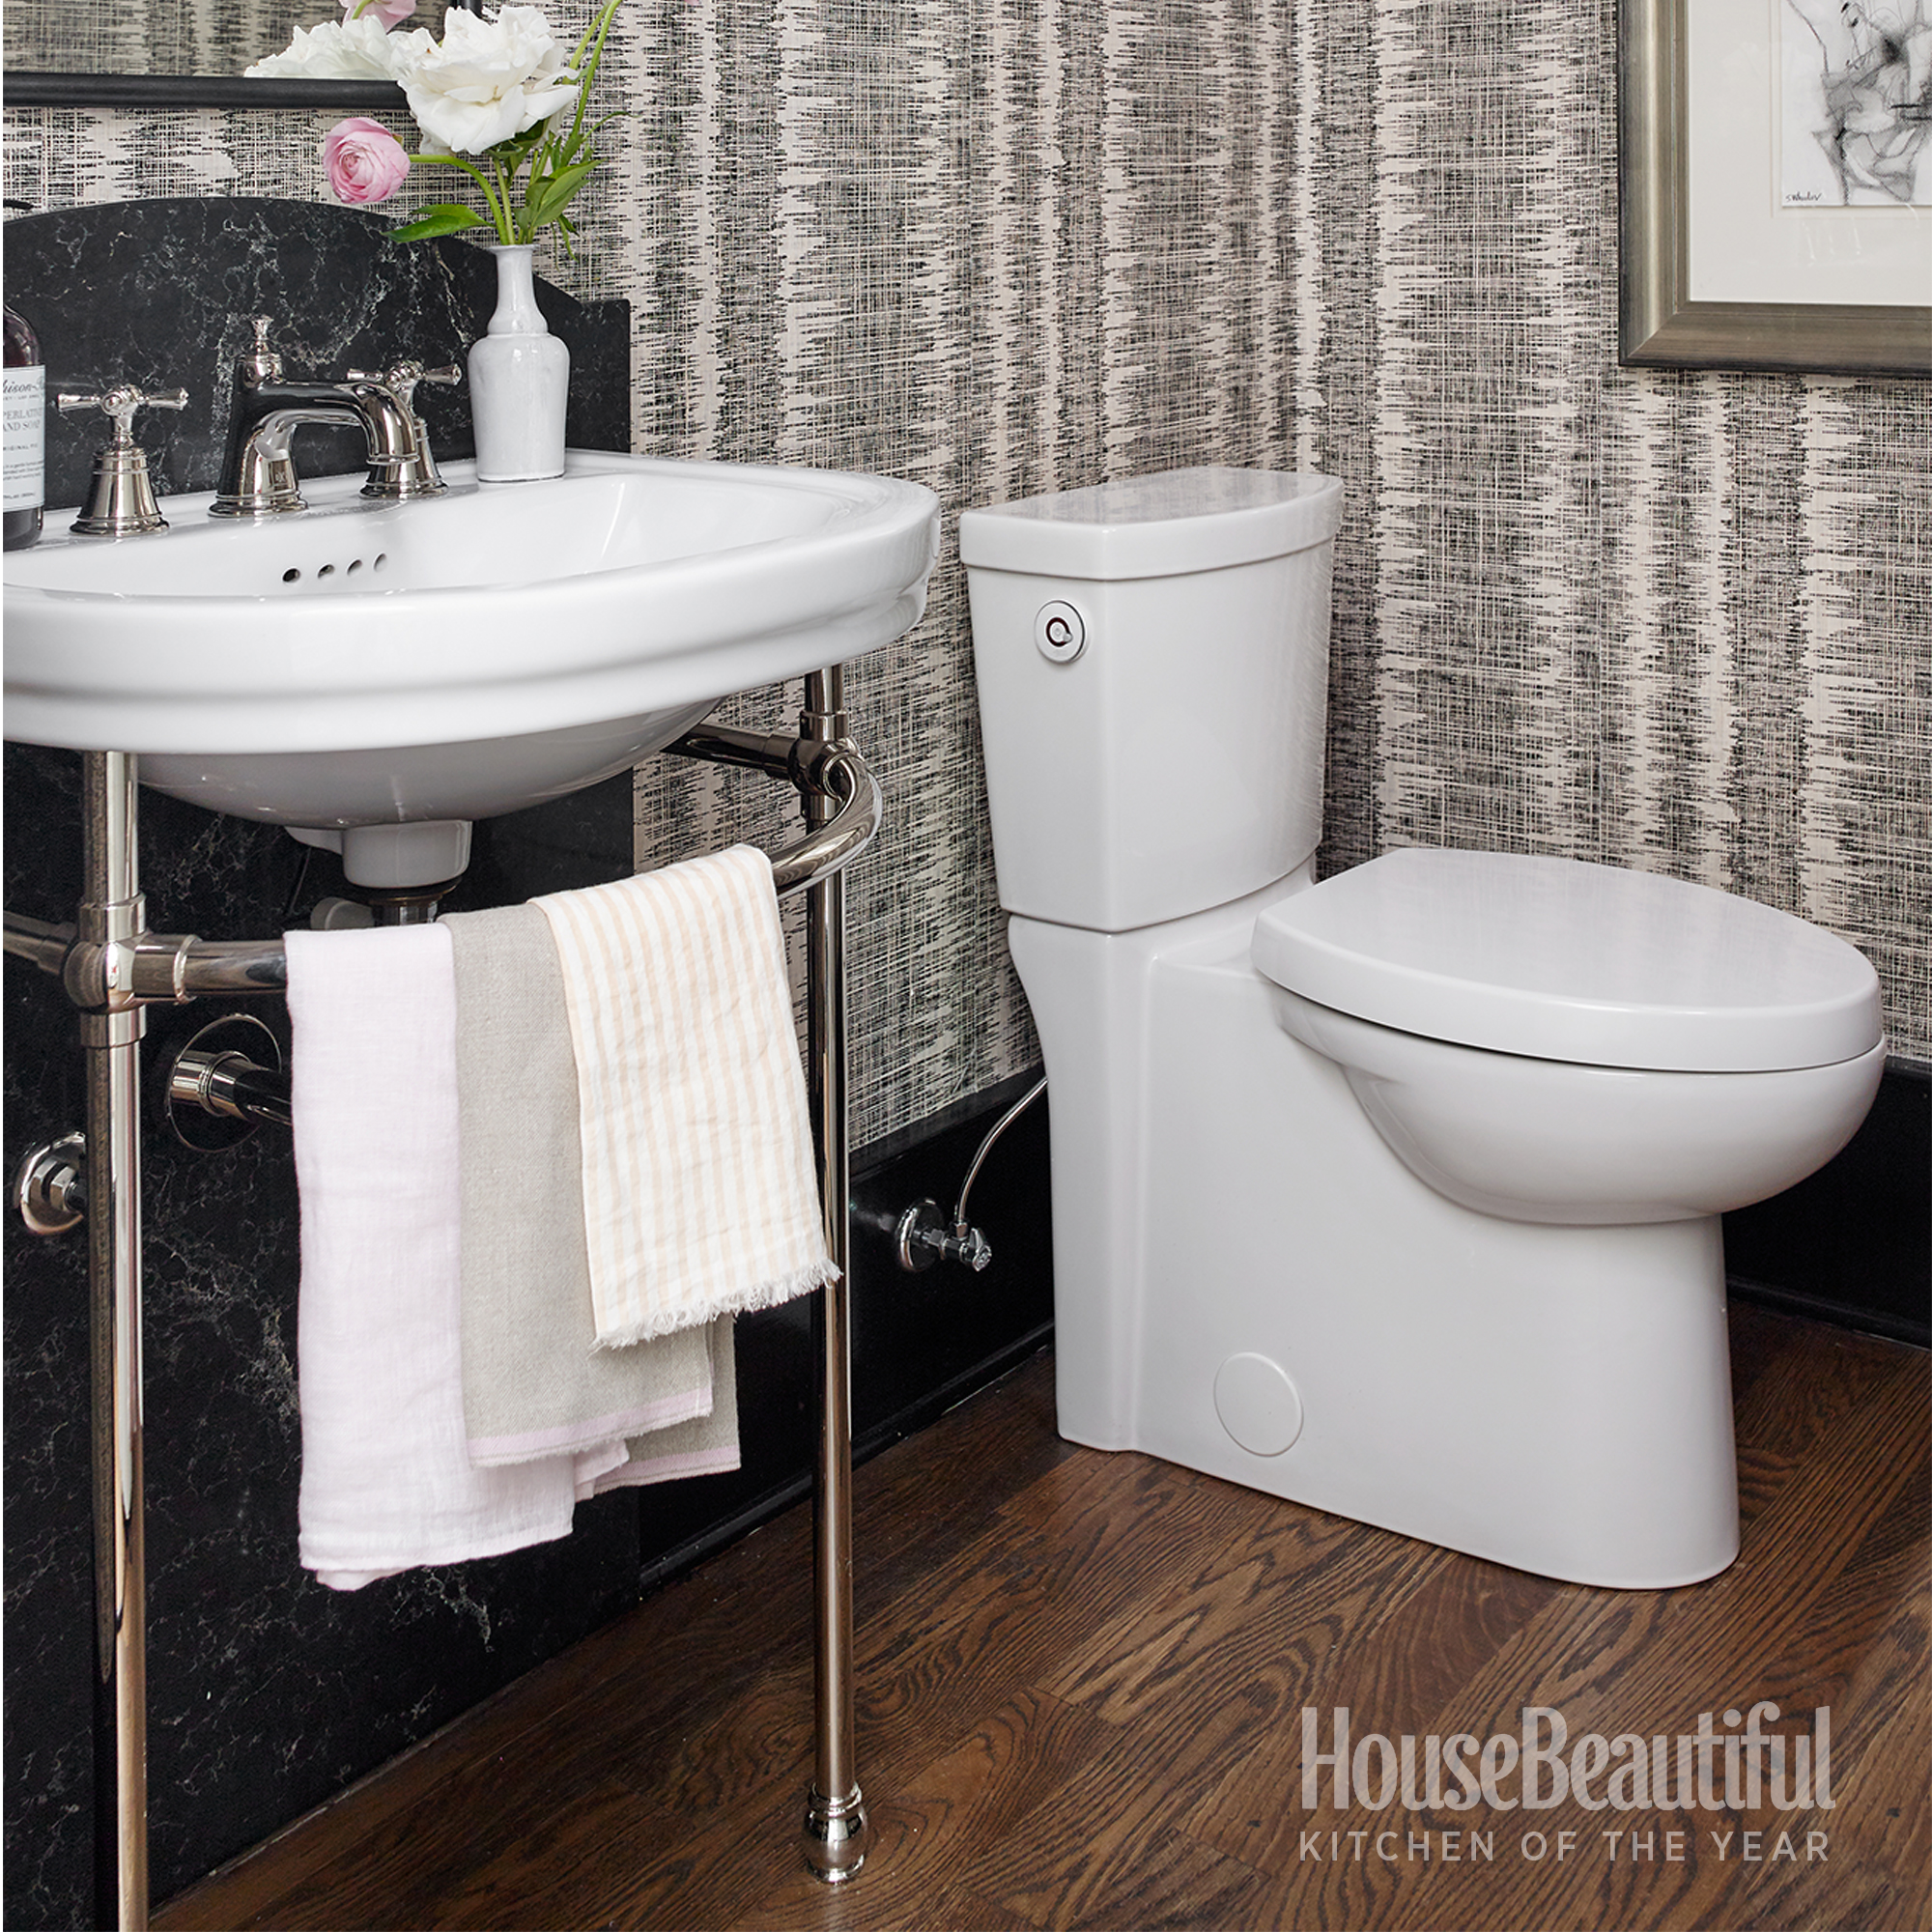 24 in. Console Bathroom Sink, 3 Hole with Console Leg